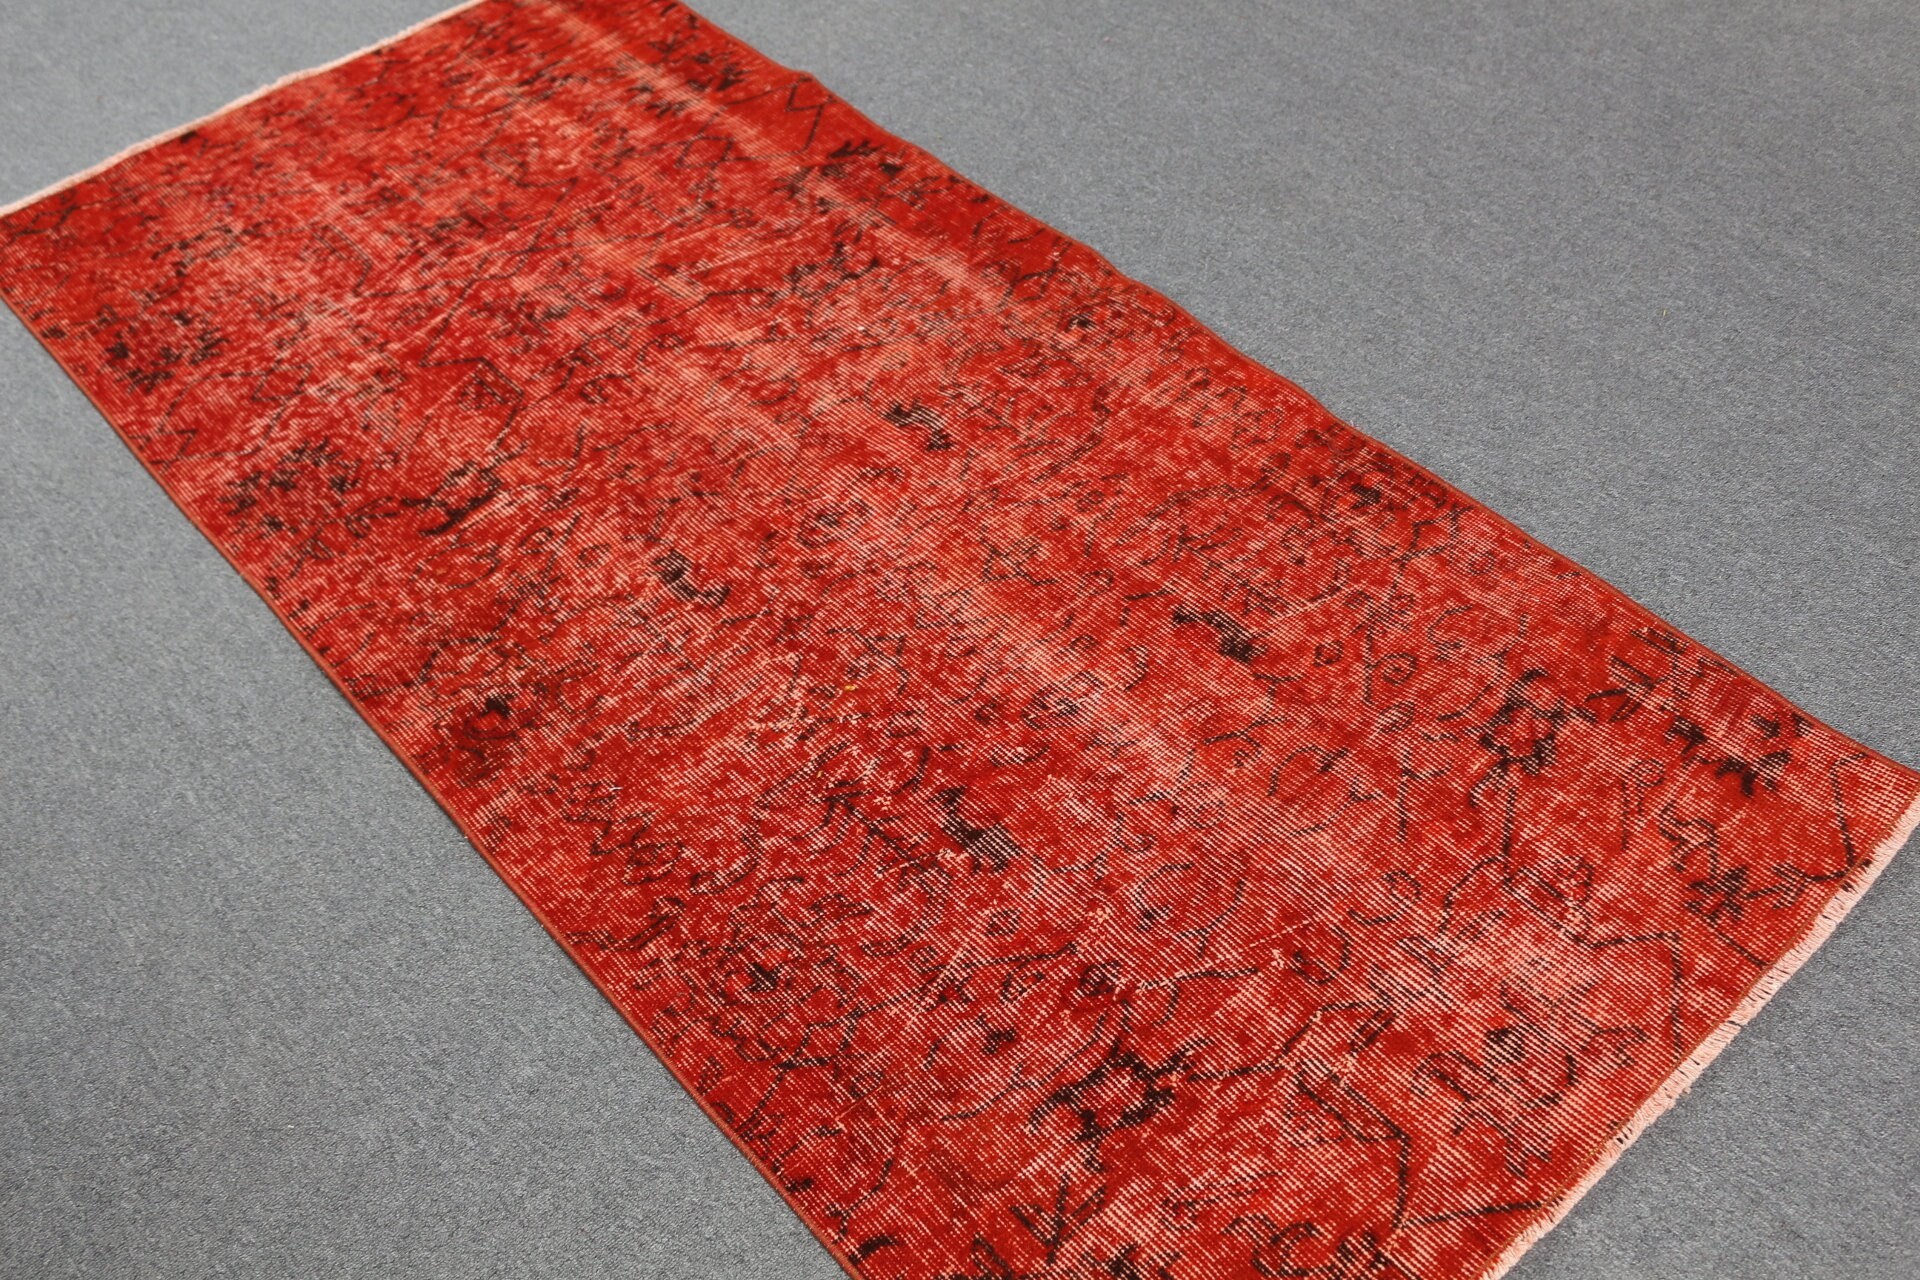 Turkish Rugs, Kitchen Rug, 3x6.5 ft Accent Rug, Home Decor Rug, Vintage Rugs, Wool Rug, Red Cool Rug, Rugs for Kitchen, Nursery Rug